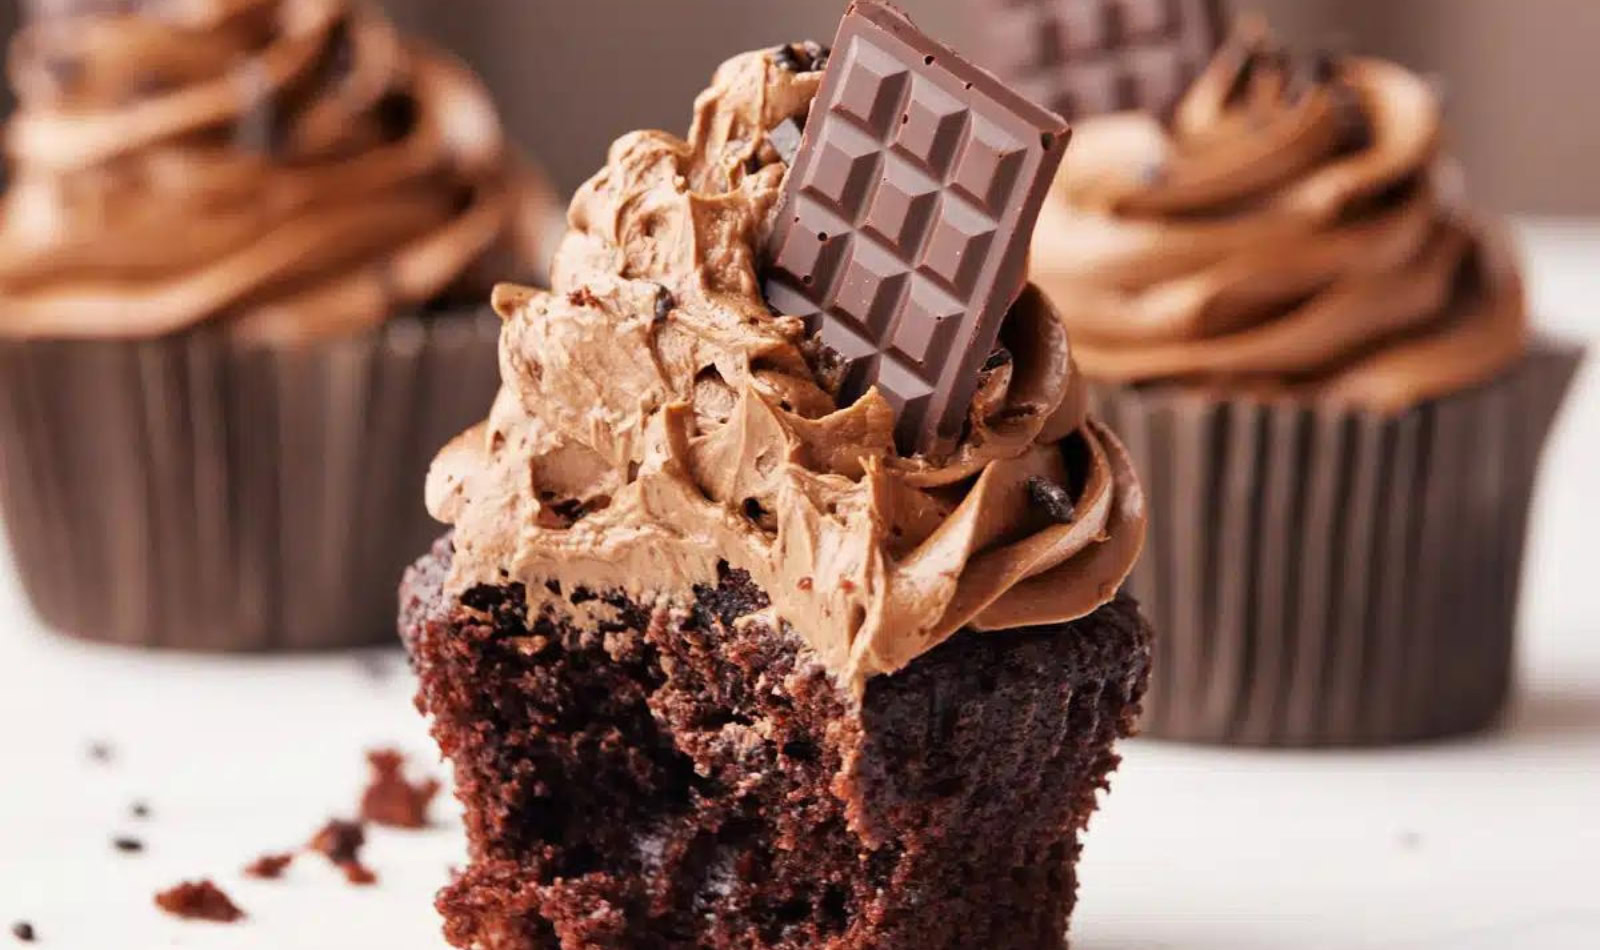 image of Chocolate Cupcakes with Silky Chocolate Buttercream frosting and a slice of chocolate bar on top.